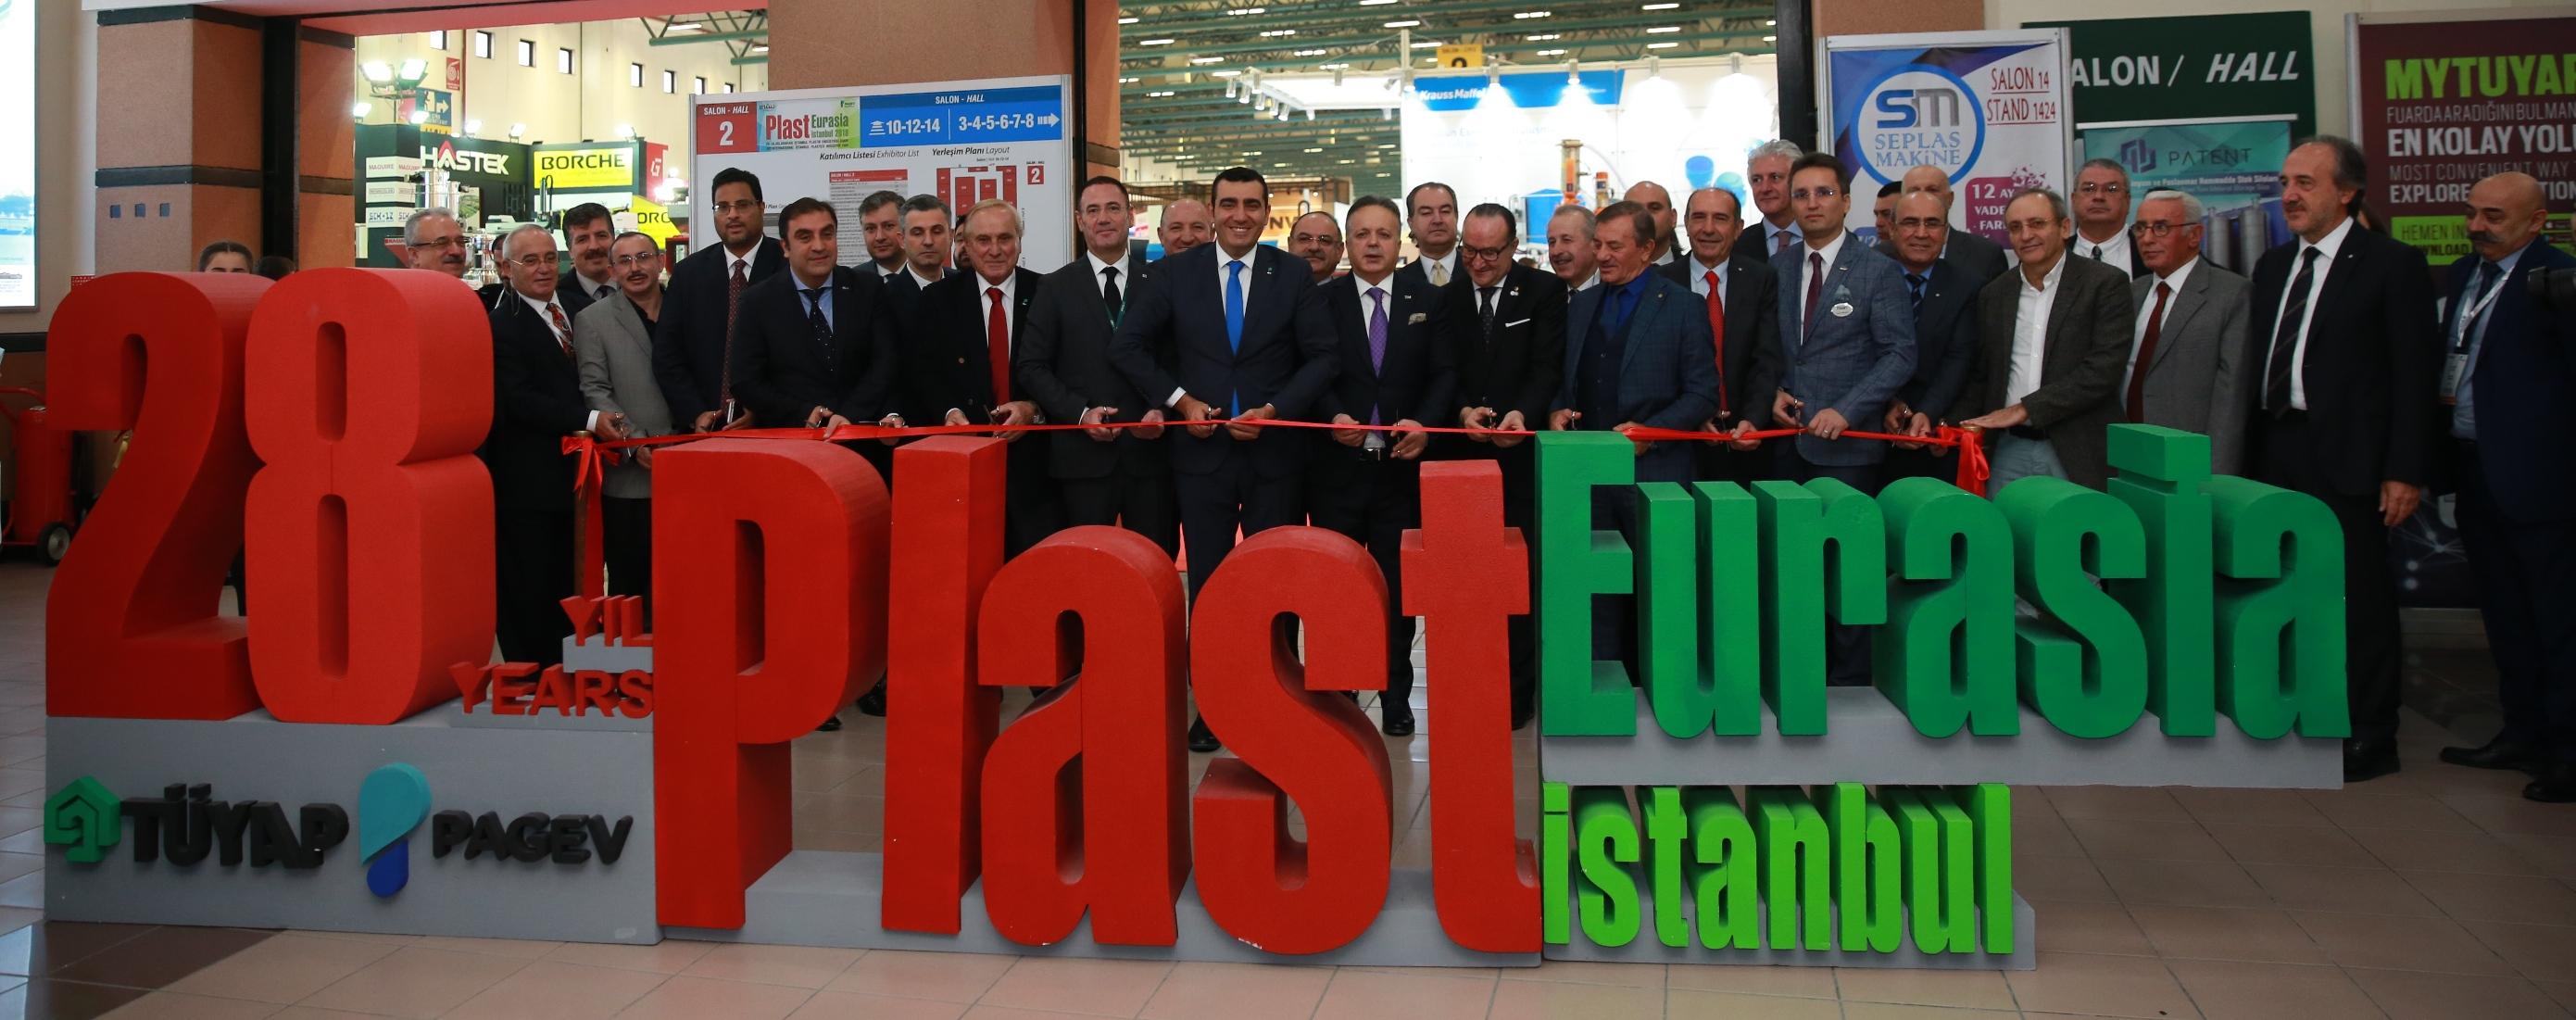 THE PLASTICS INDUSTRY COMES TOGETHER AT THE 28TH PLASTEURASIA FAIR